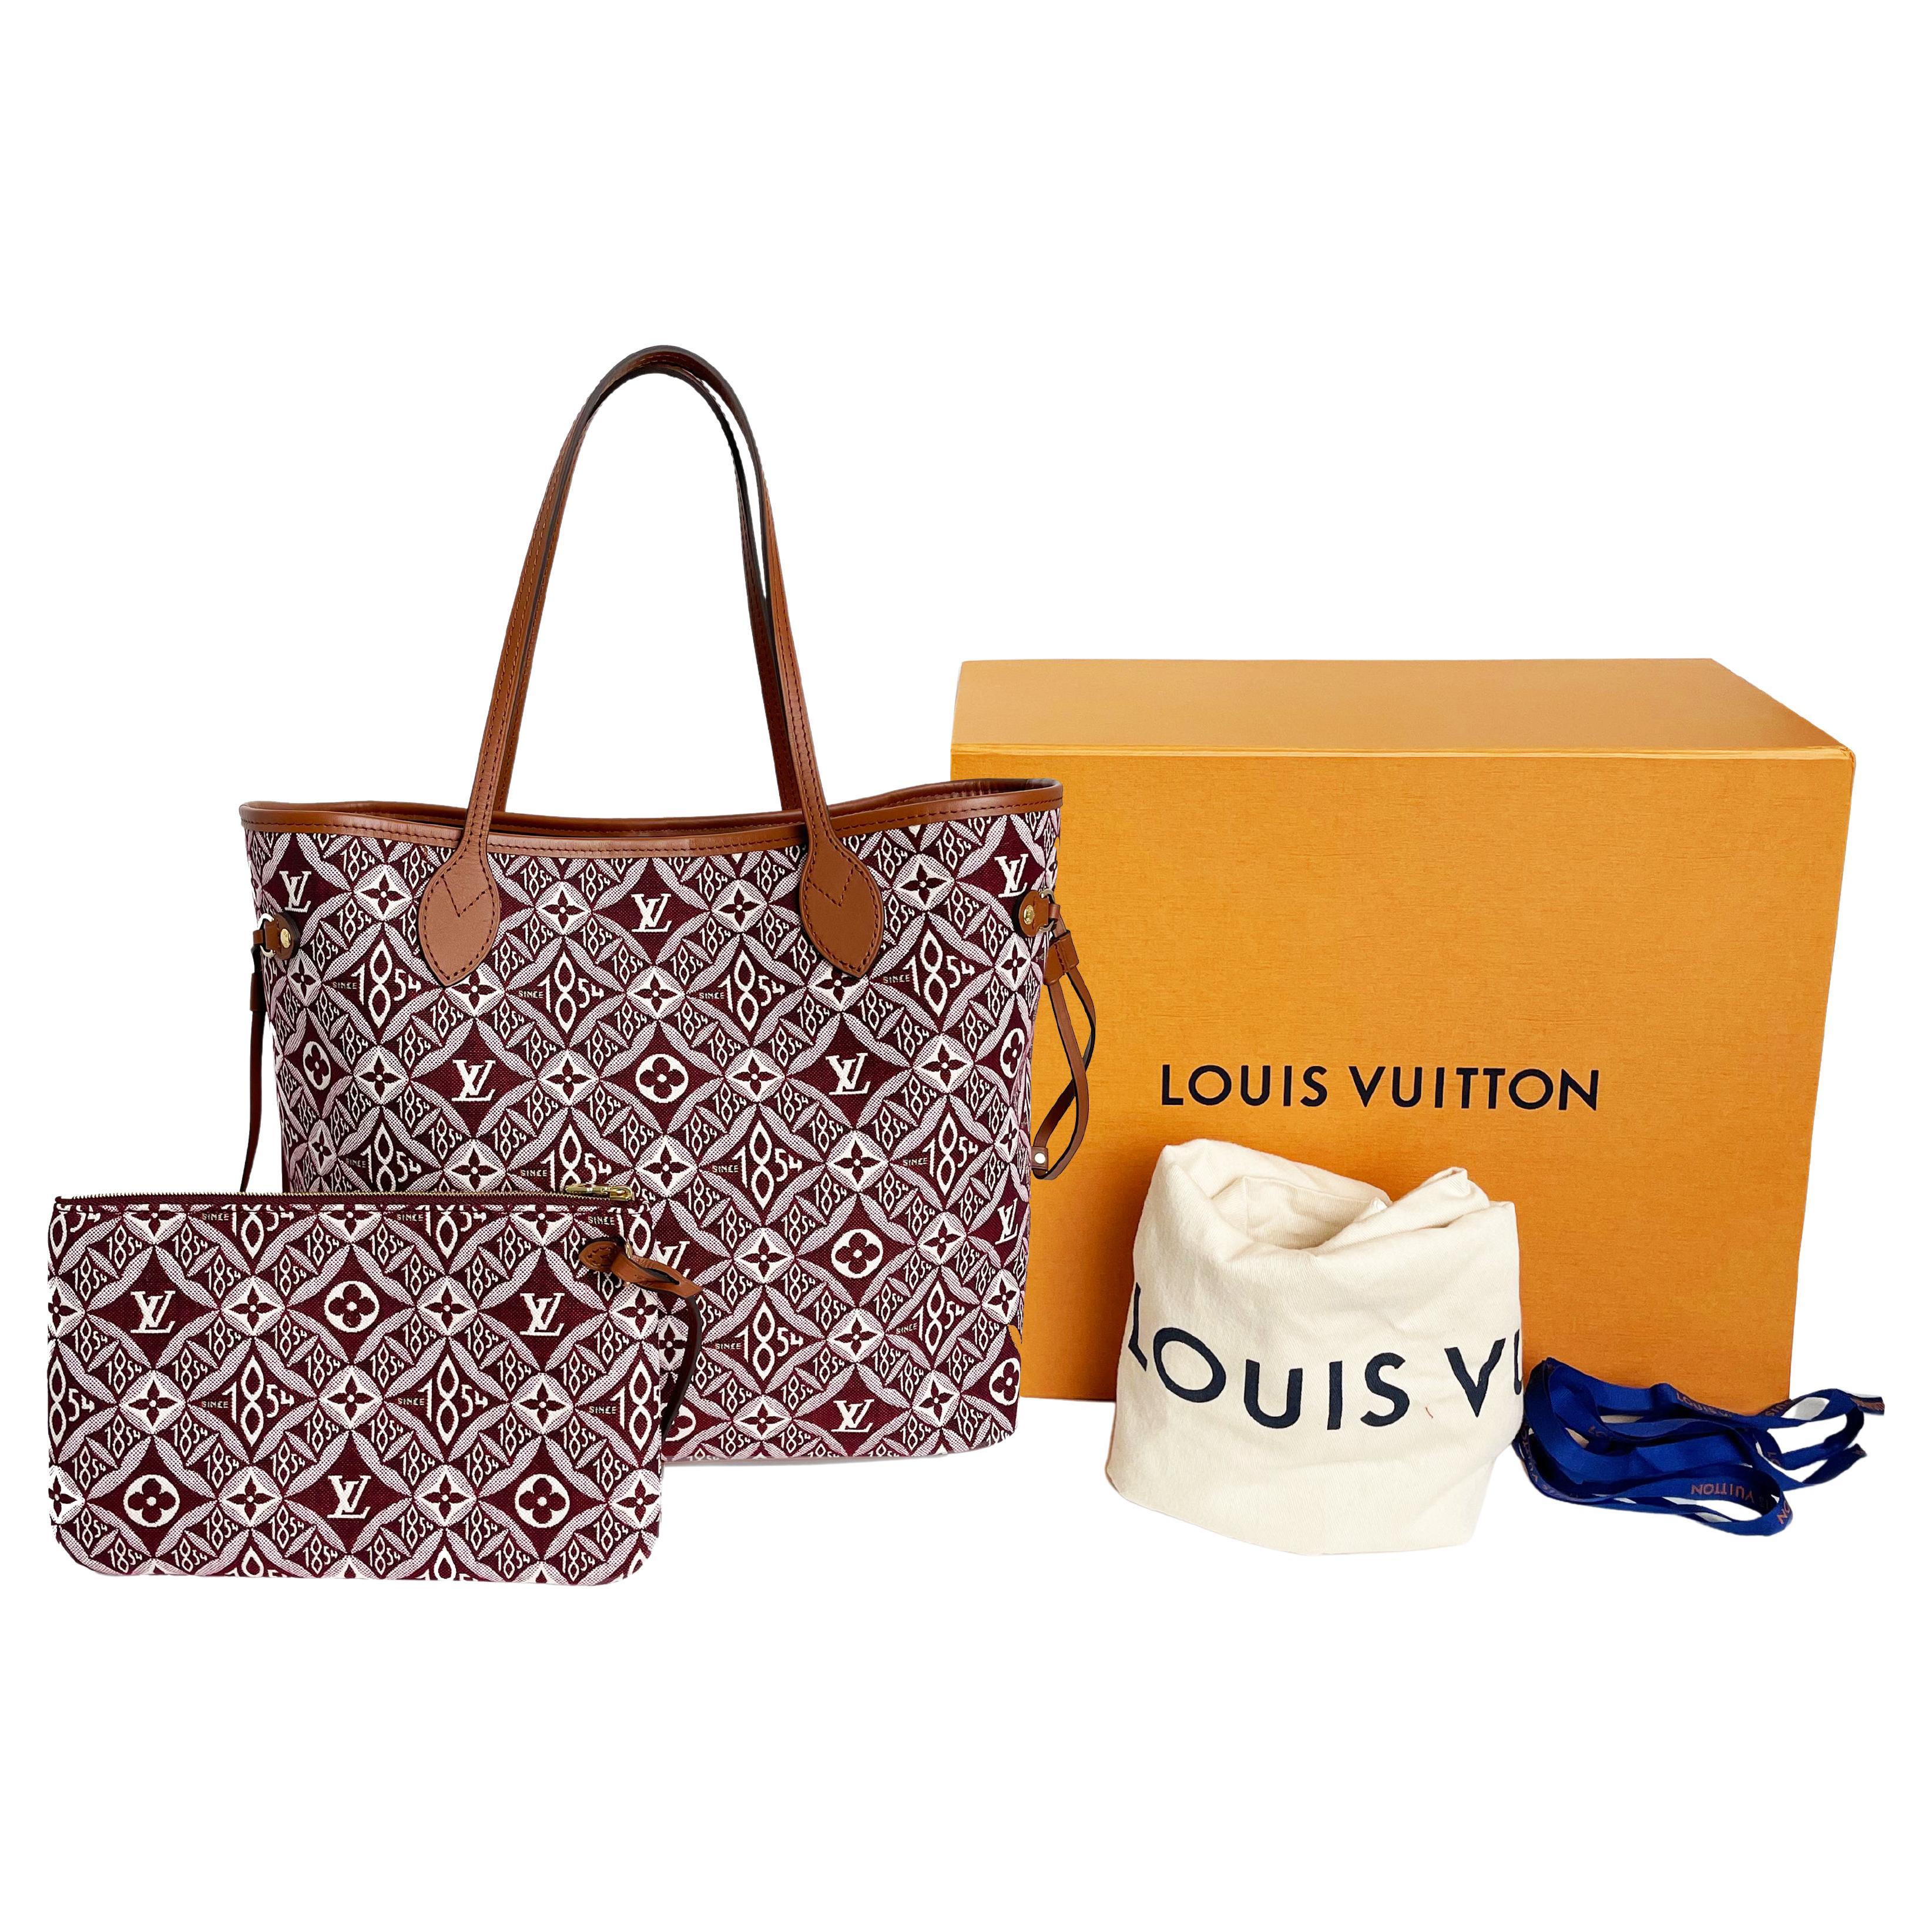 How to Buy a Used and Pre-owned Louis Vuitton Handbag. My used bag was  purchased with water damage so I'm giving …